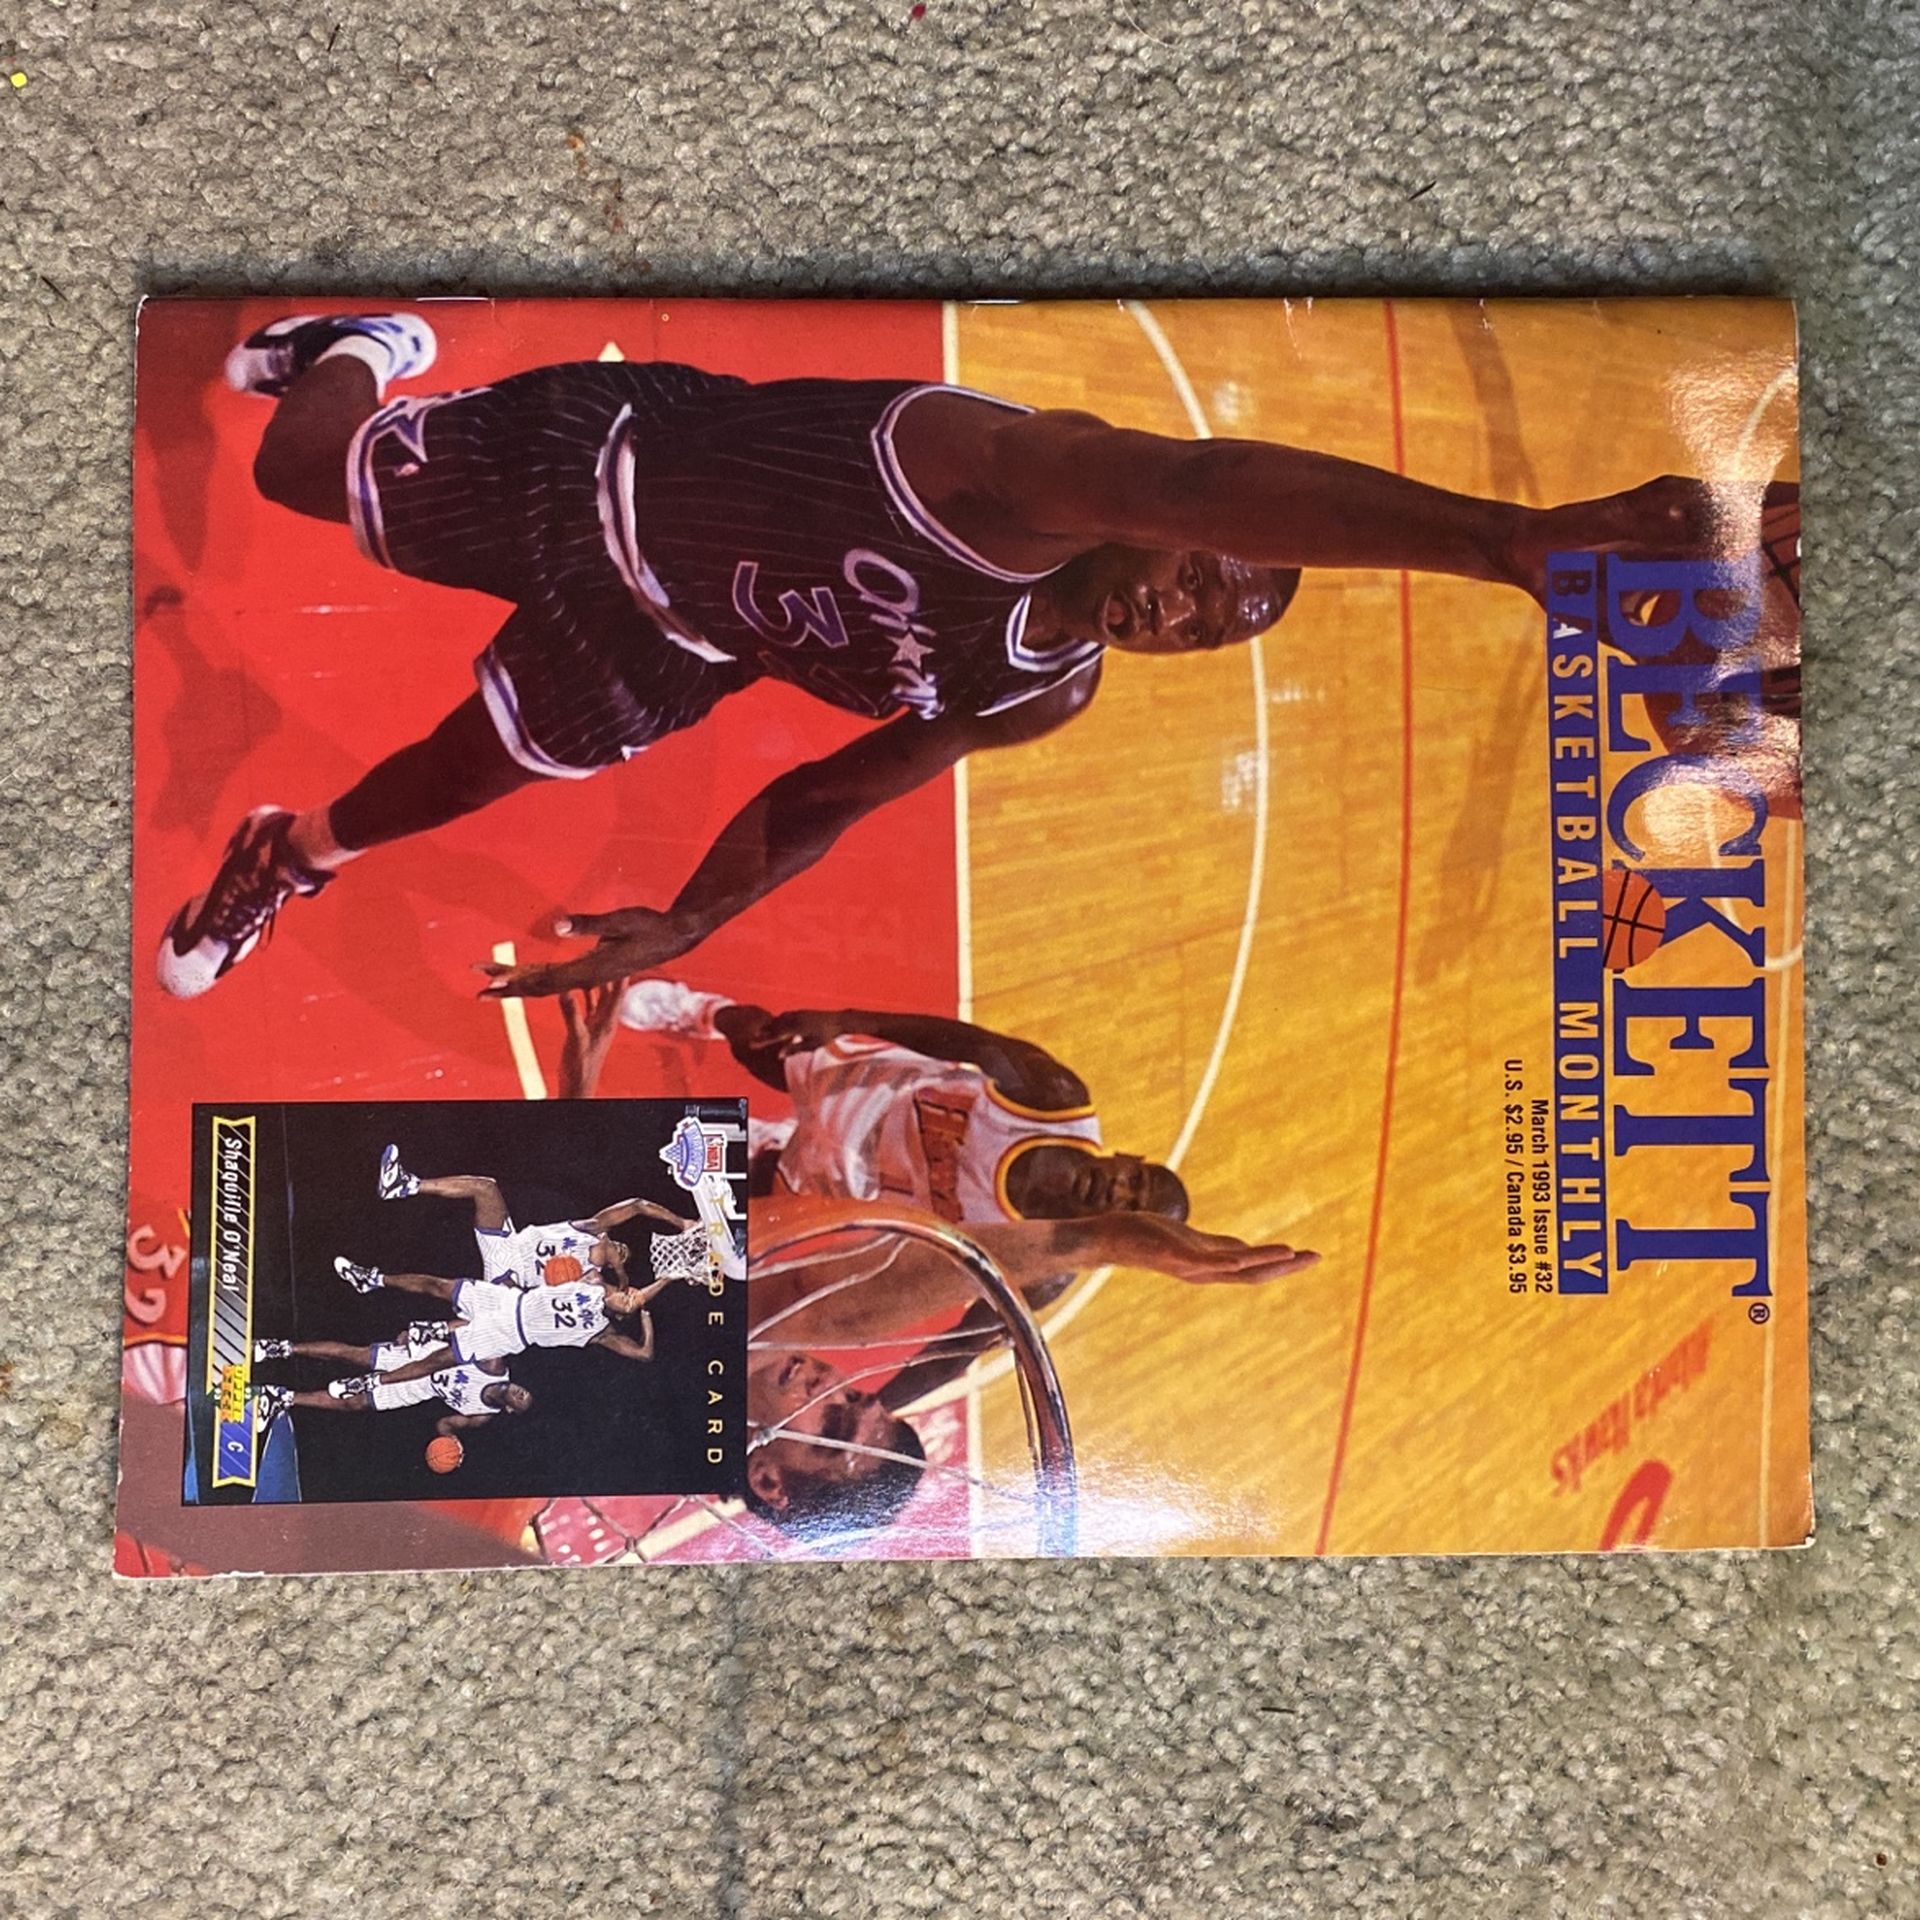 Beckett Basketball Monthly Shaquille O’Neal Addition With Trading Card Inside Mint From 1993